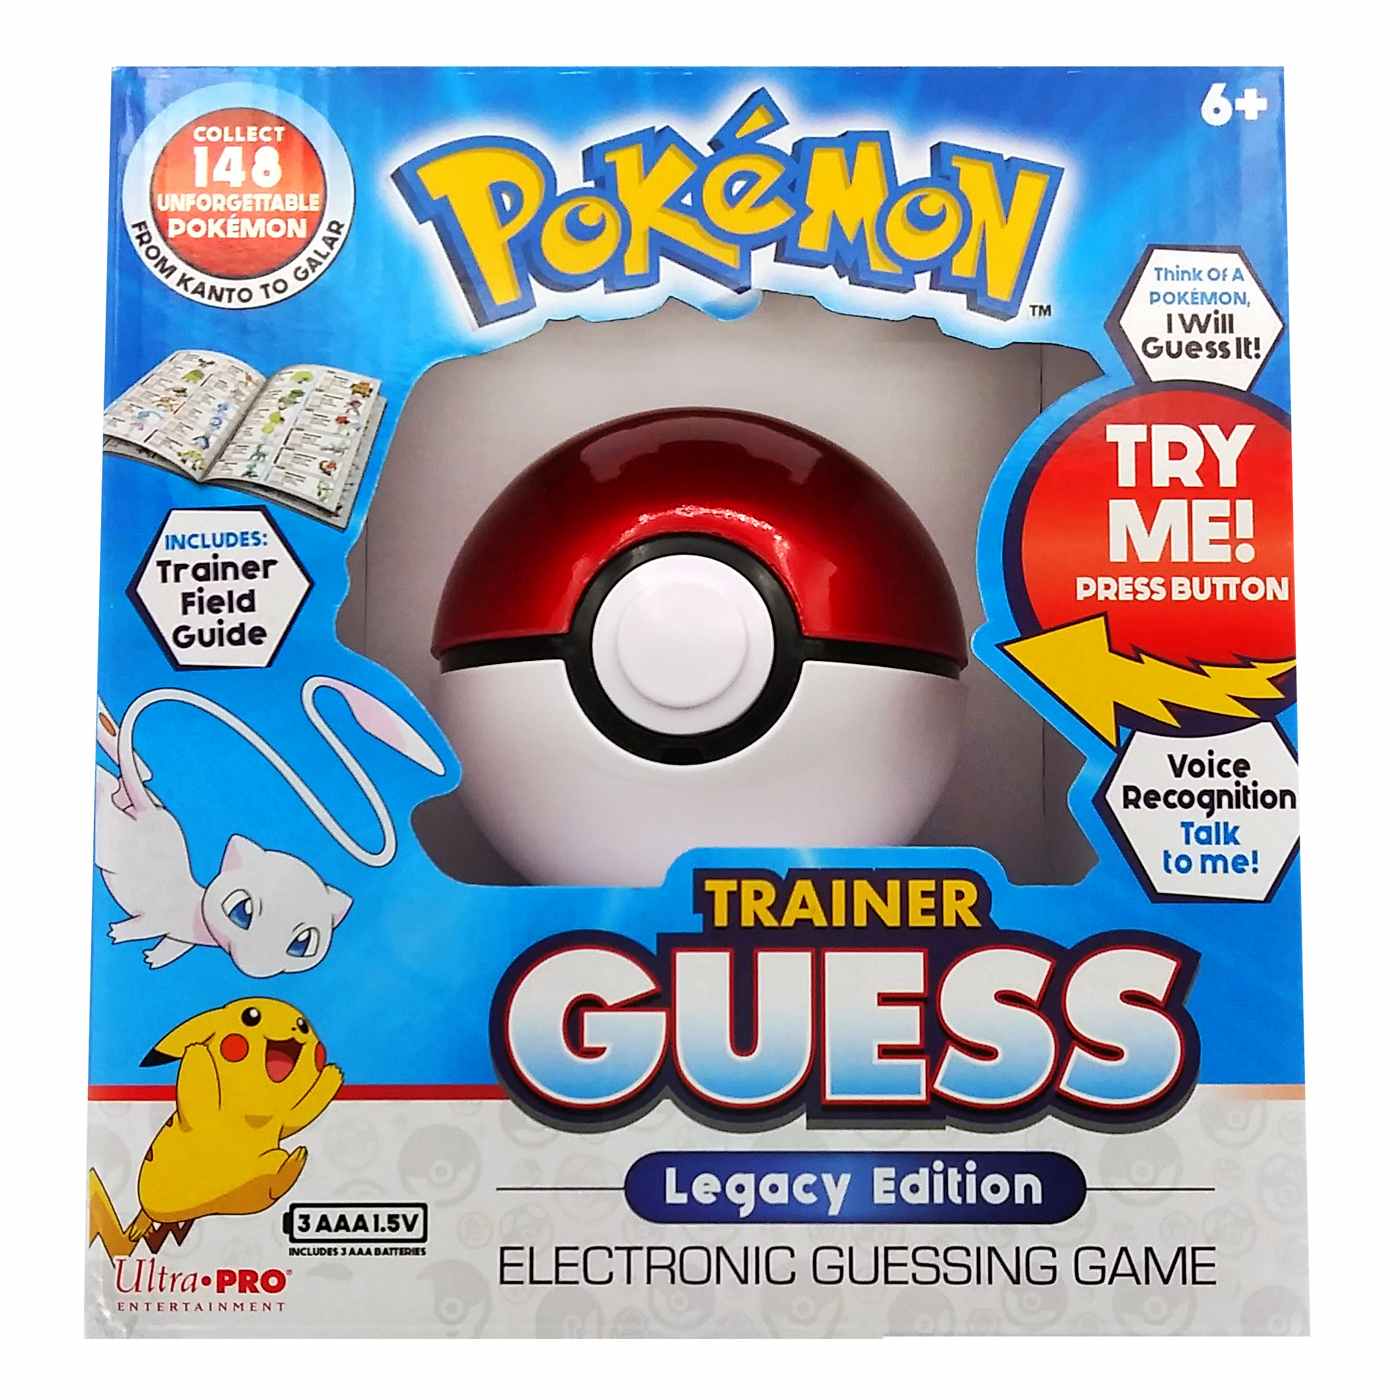 Ultra Pro Pokemon Trainer Guess Legacy Edition Game; image 1 of 3